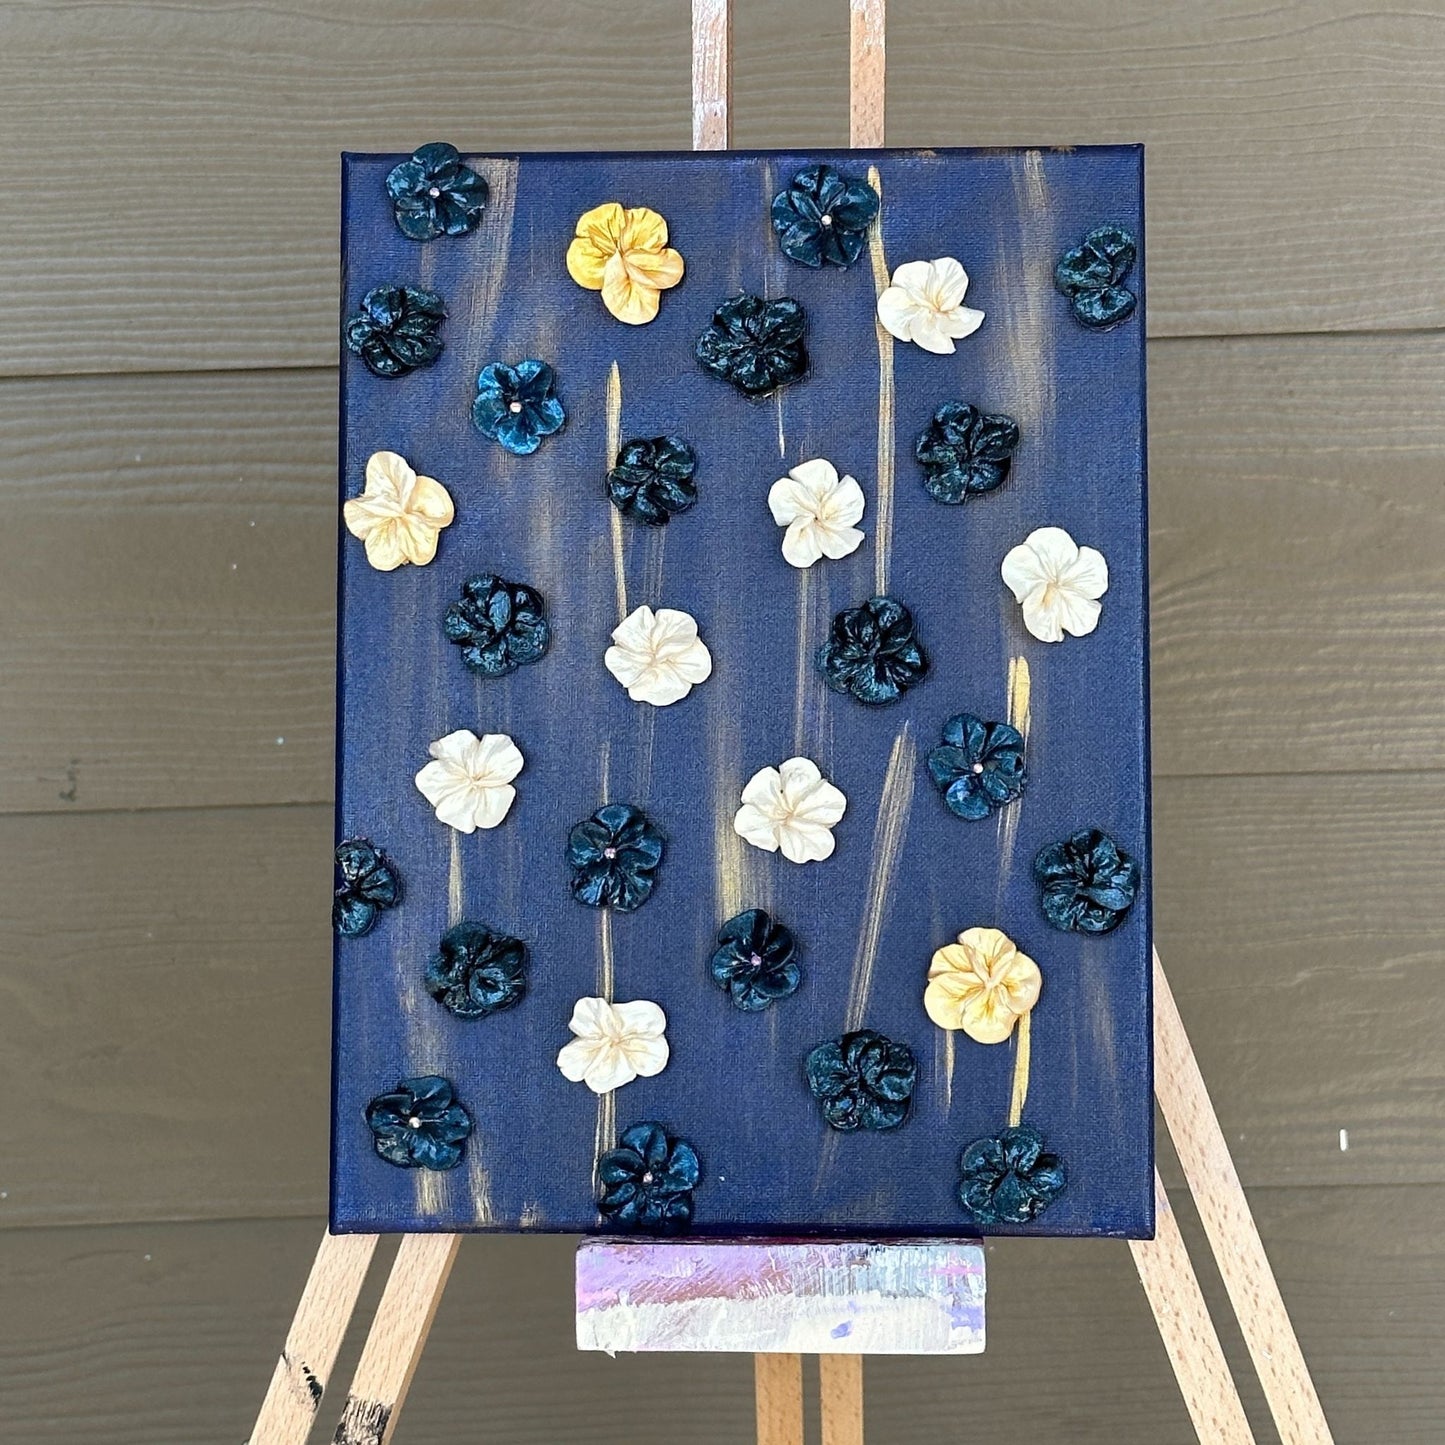 3D Navy Glitter, White, and Gold Pearl Flowers on Navy and Gold Canvas 9"x12"